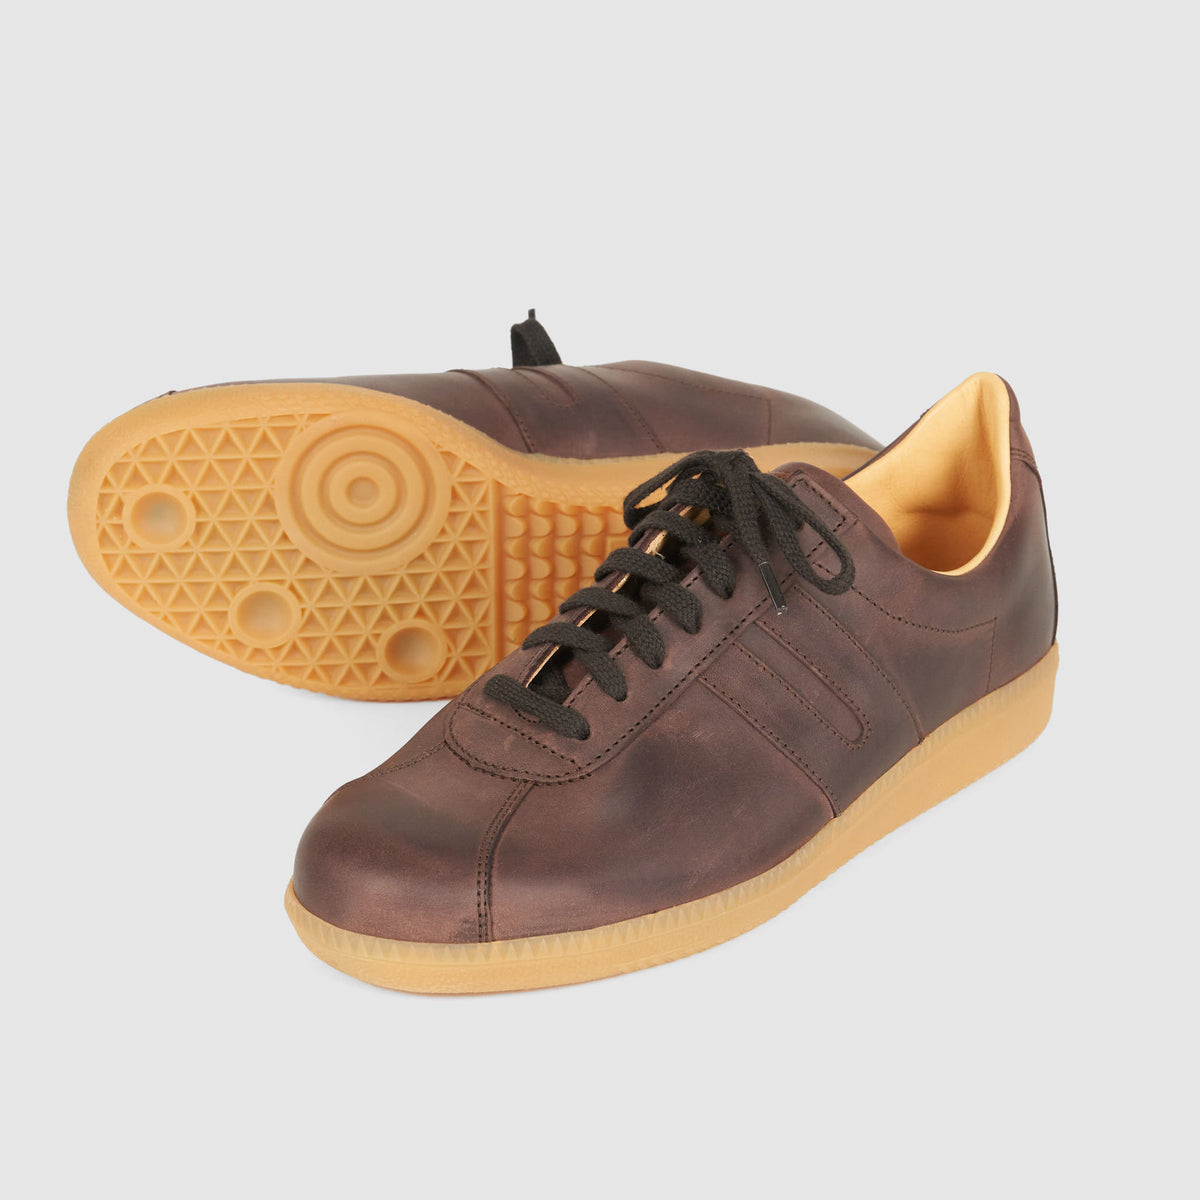 Ludwig Reiter All Leather Sneaker